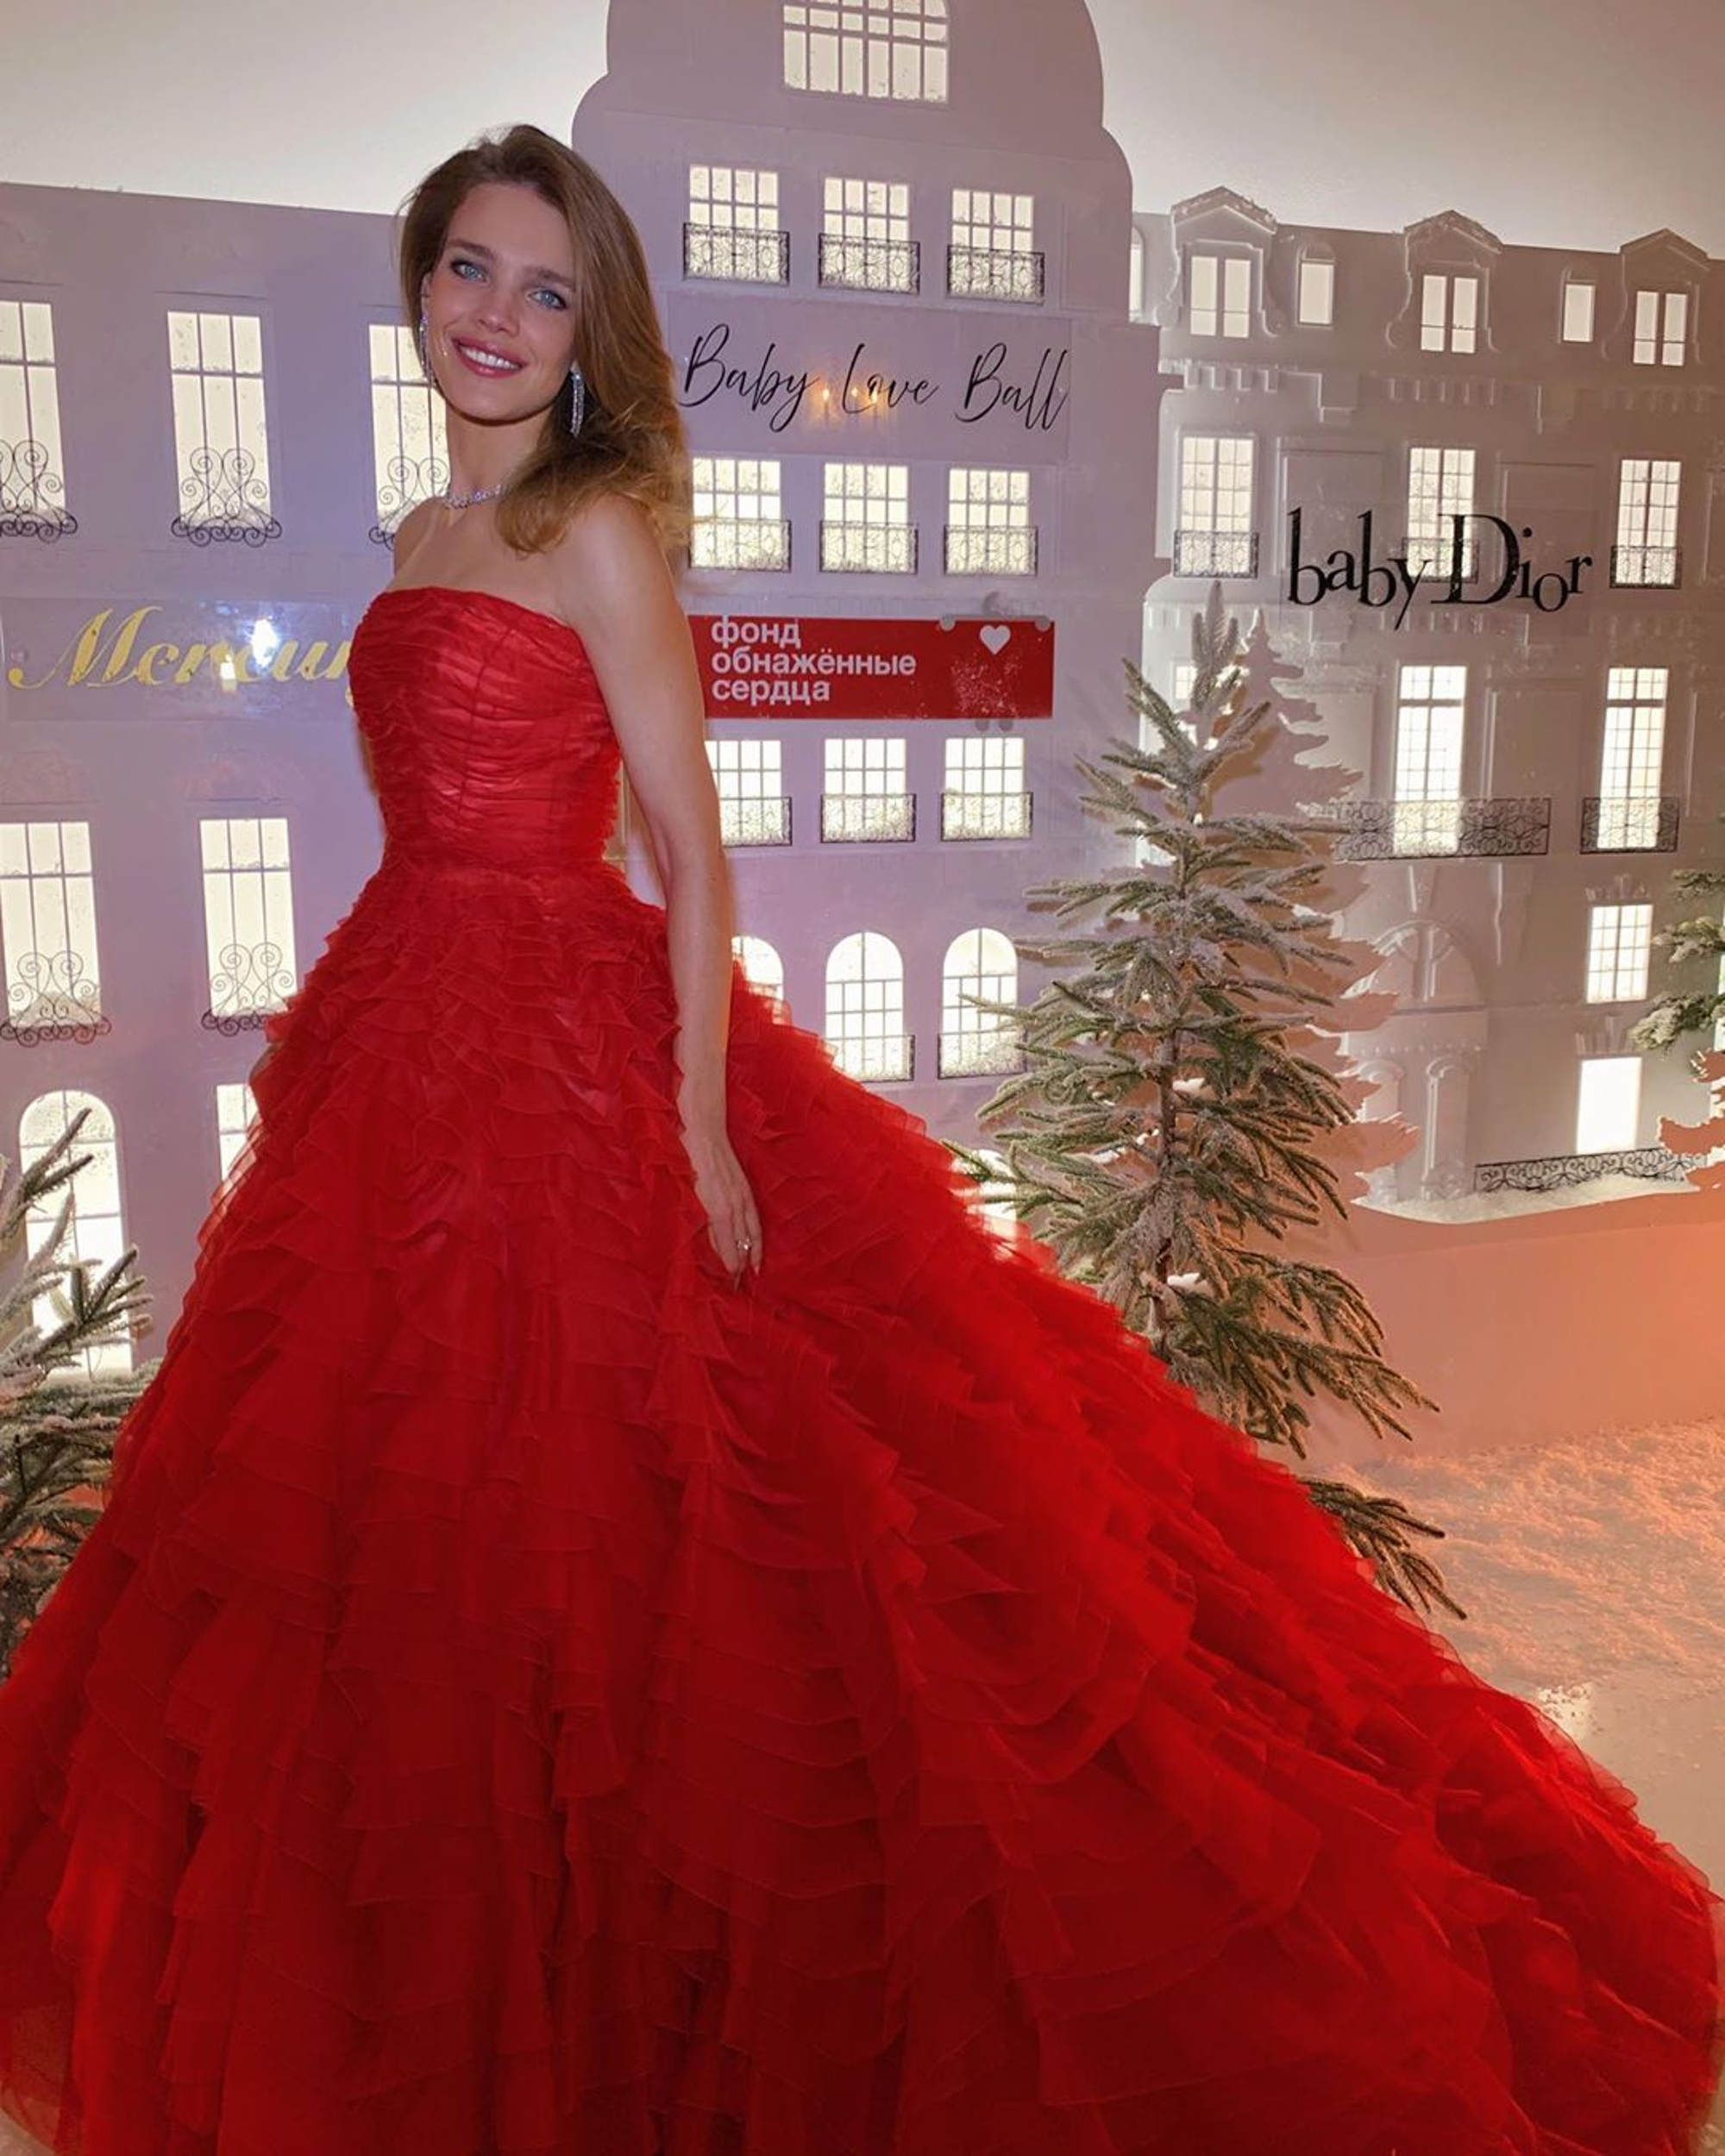 Read more about the article Natalia Vodianova Stuns In Flowing Red Gown At Ball